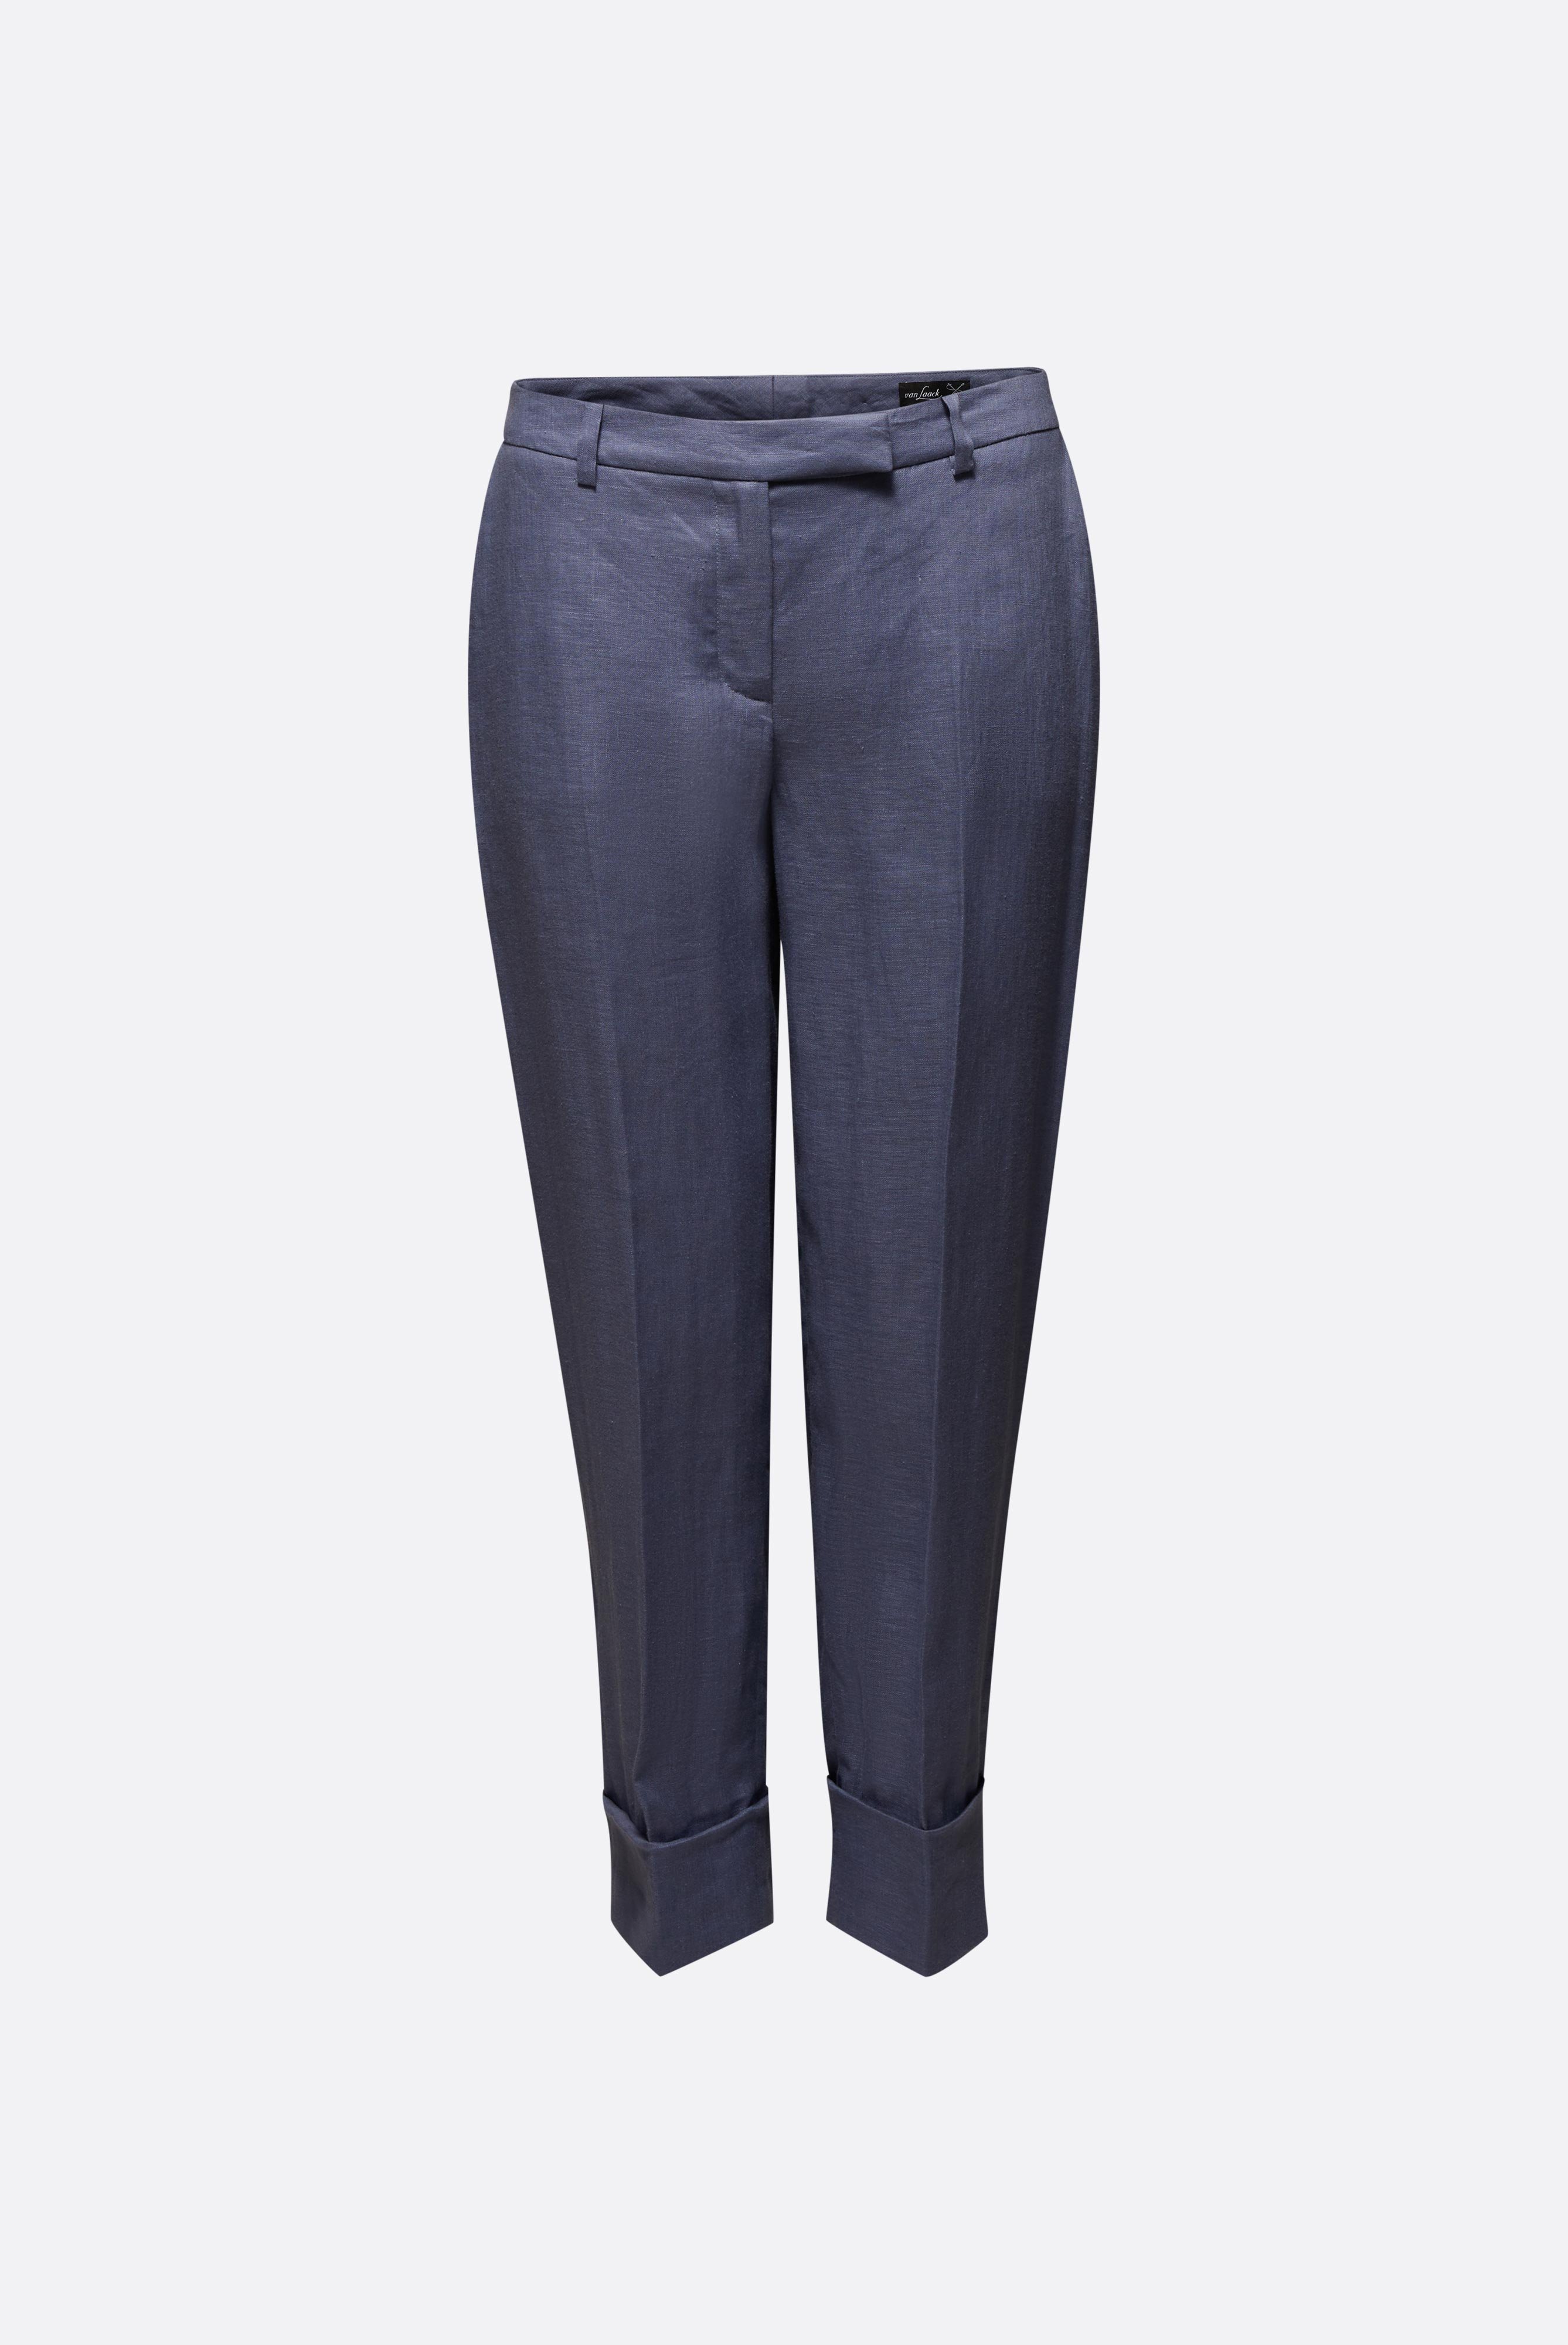 Jeans & Trousers+Linen Pants with Cuff+05.657V..H50555.680.36